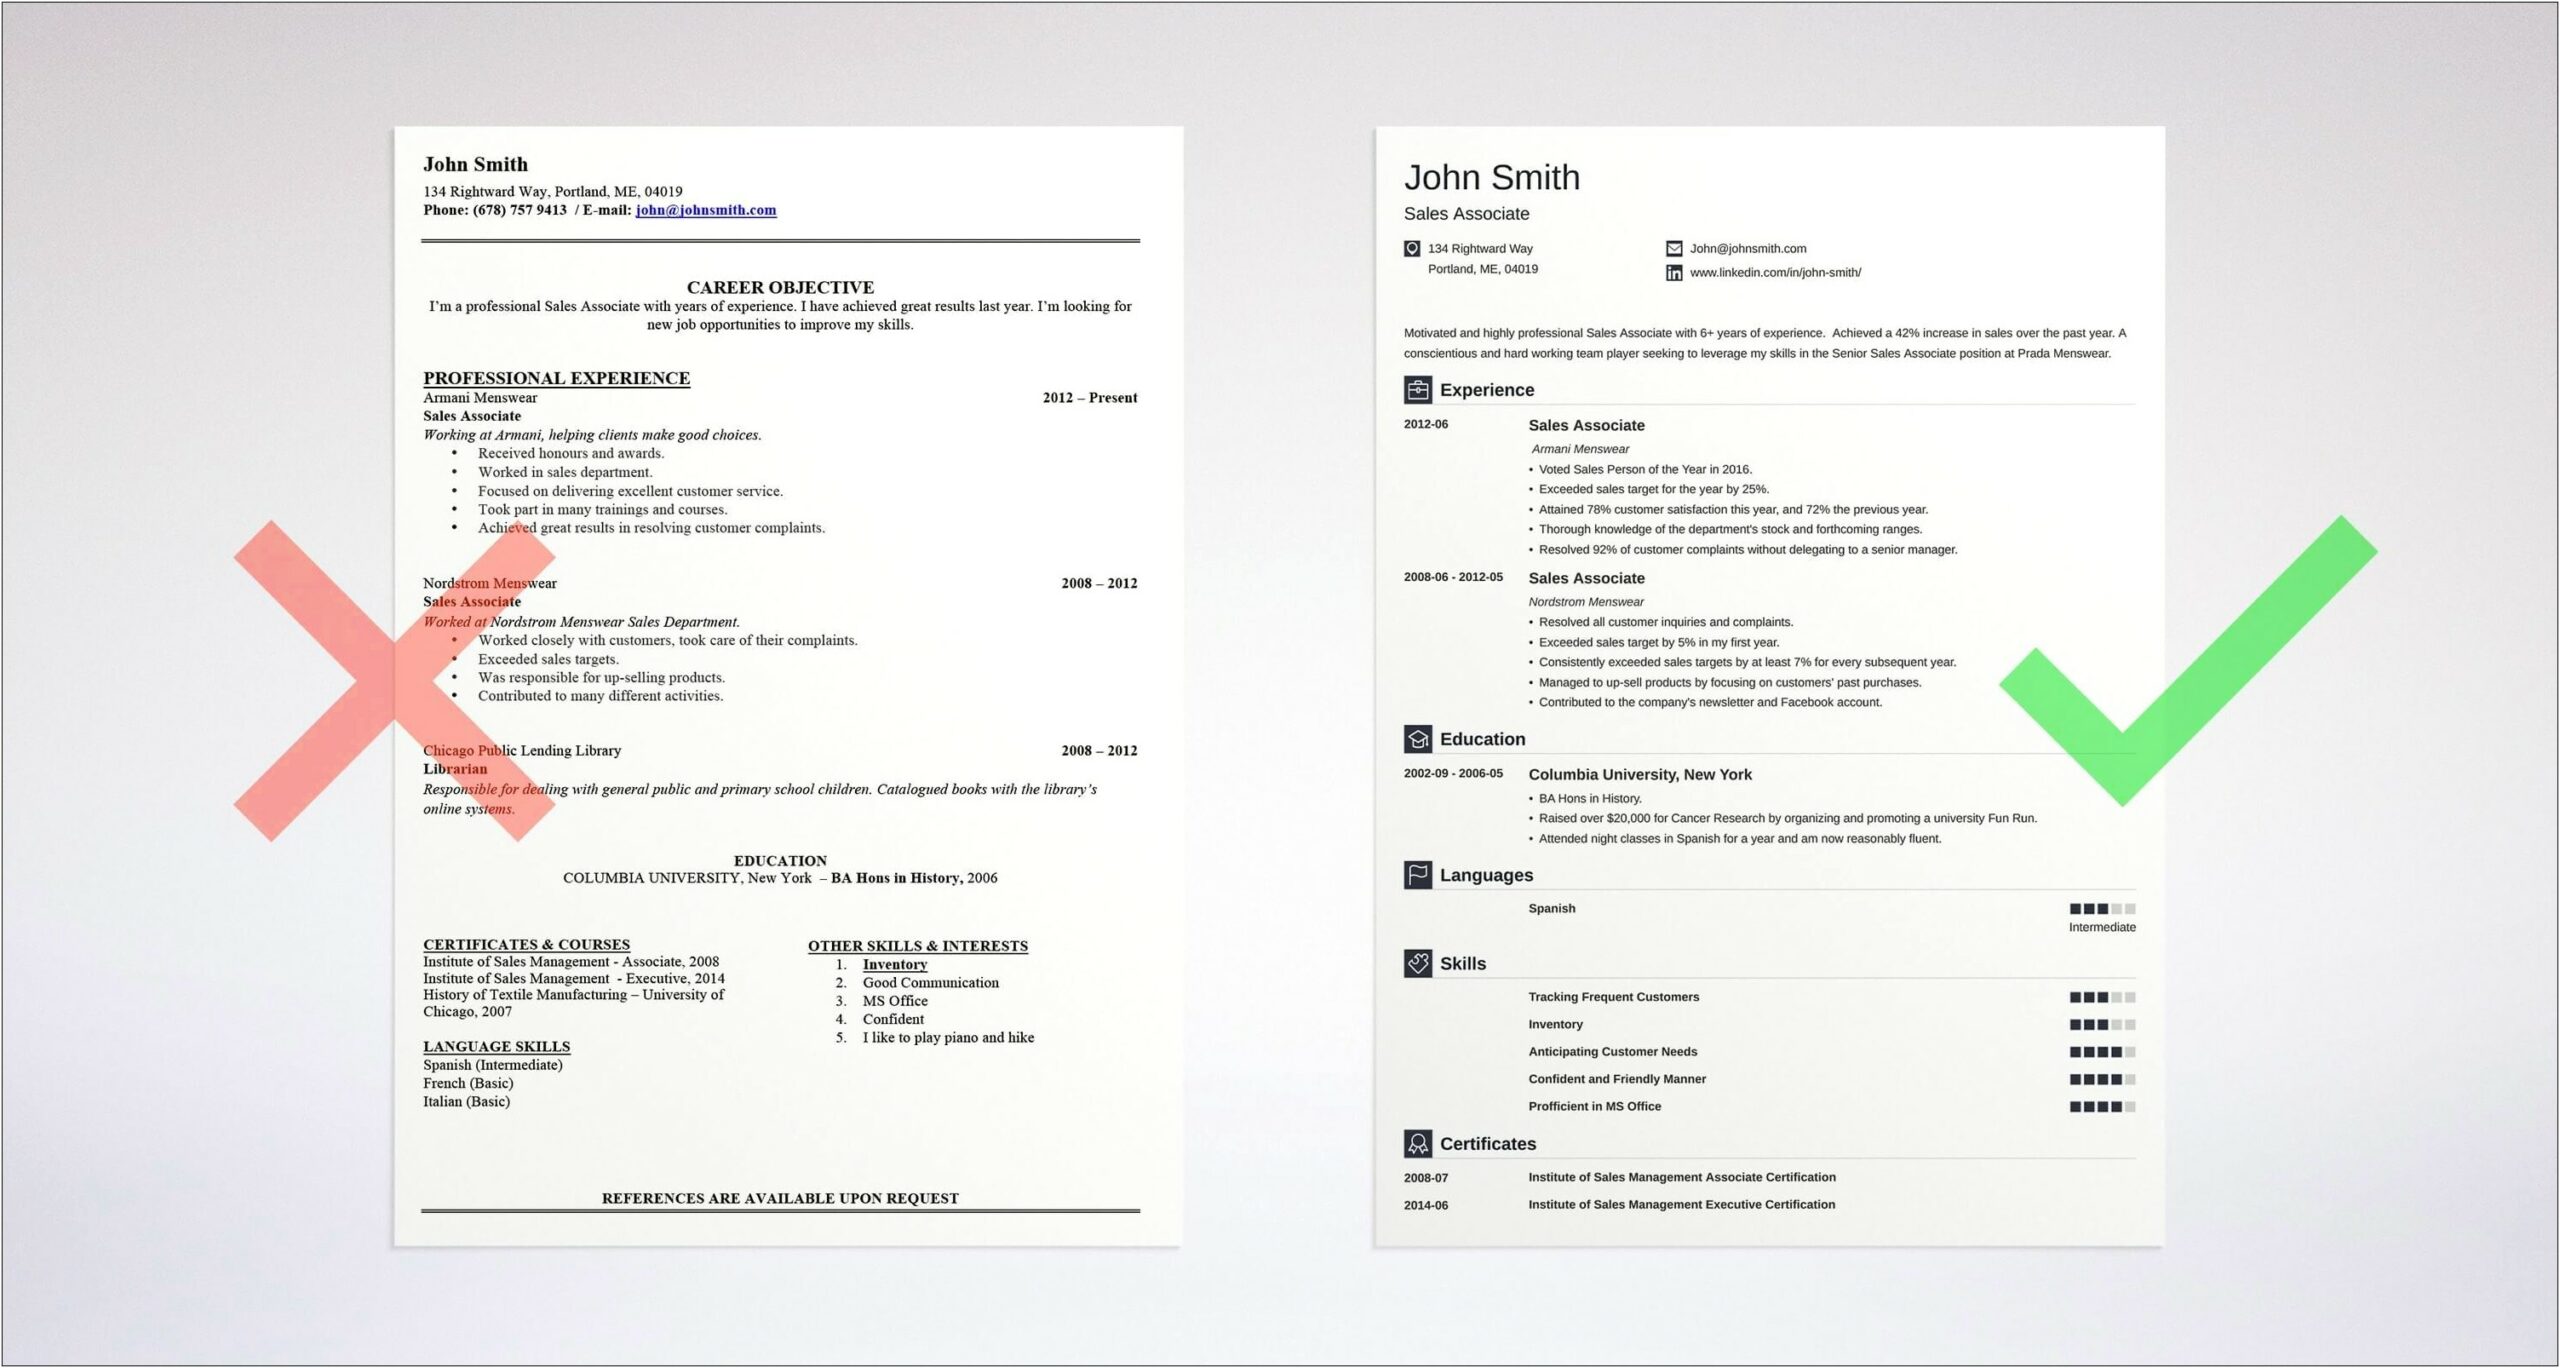 Examples Of Resumes Professional Summary